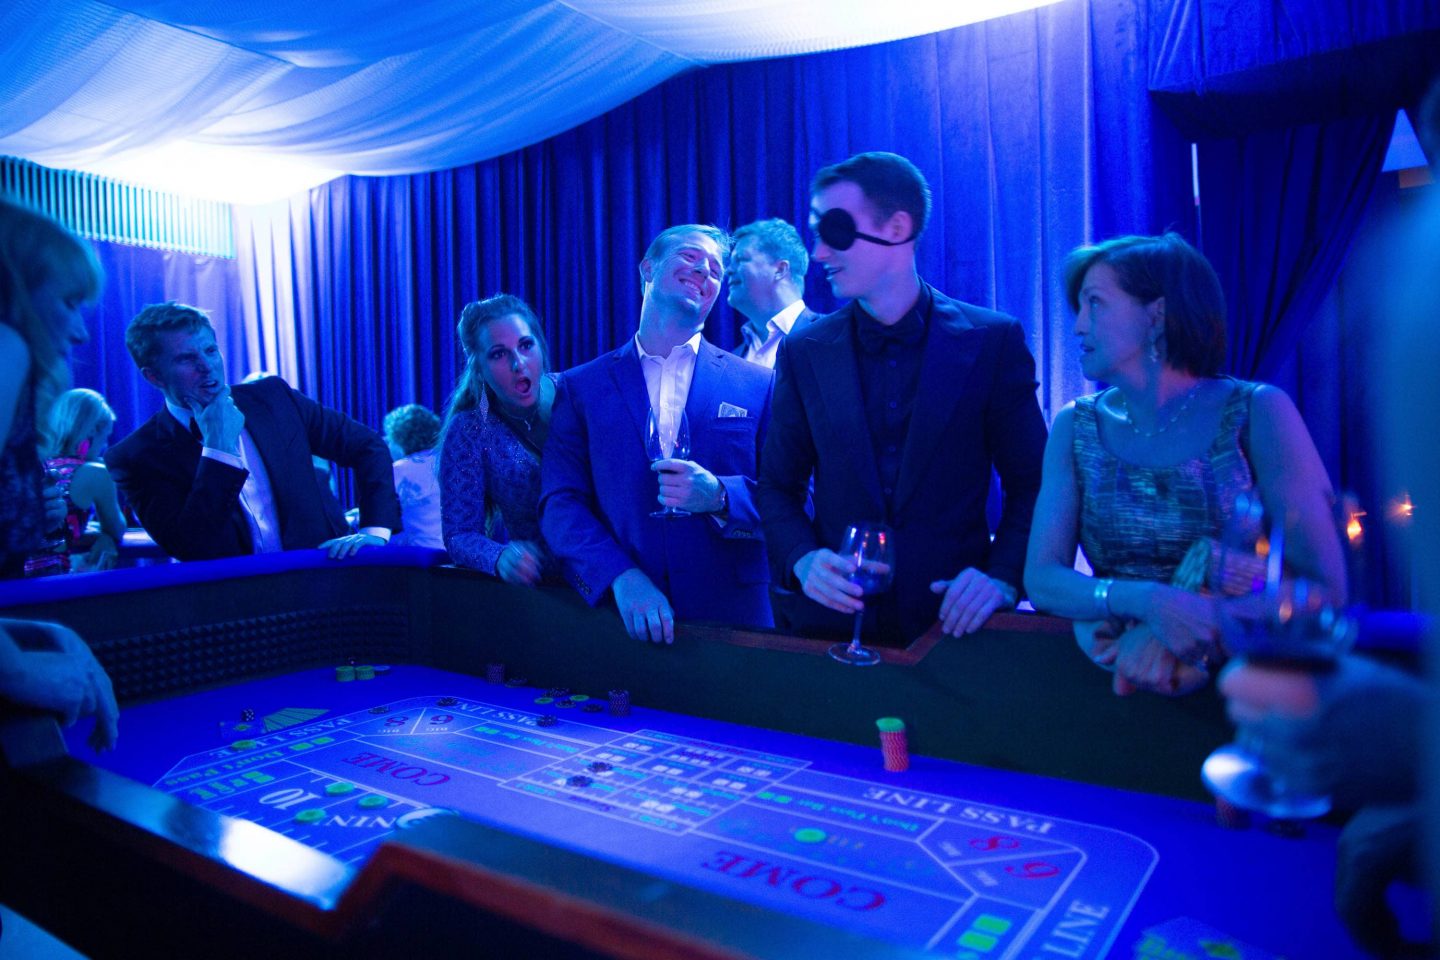 Roulette table at Casino Royale-themed party at this Aman Sveti Stefan Montenegro destination wedding weekend | Photo by Allan Zepeda